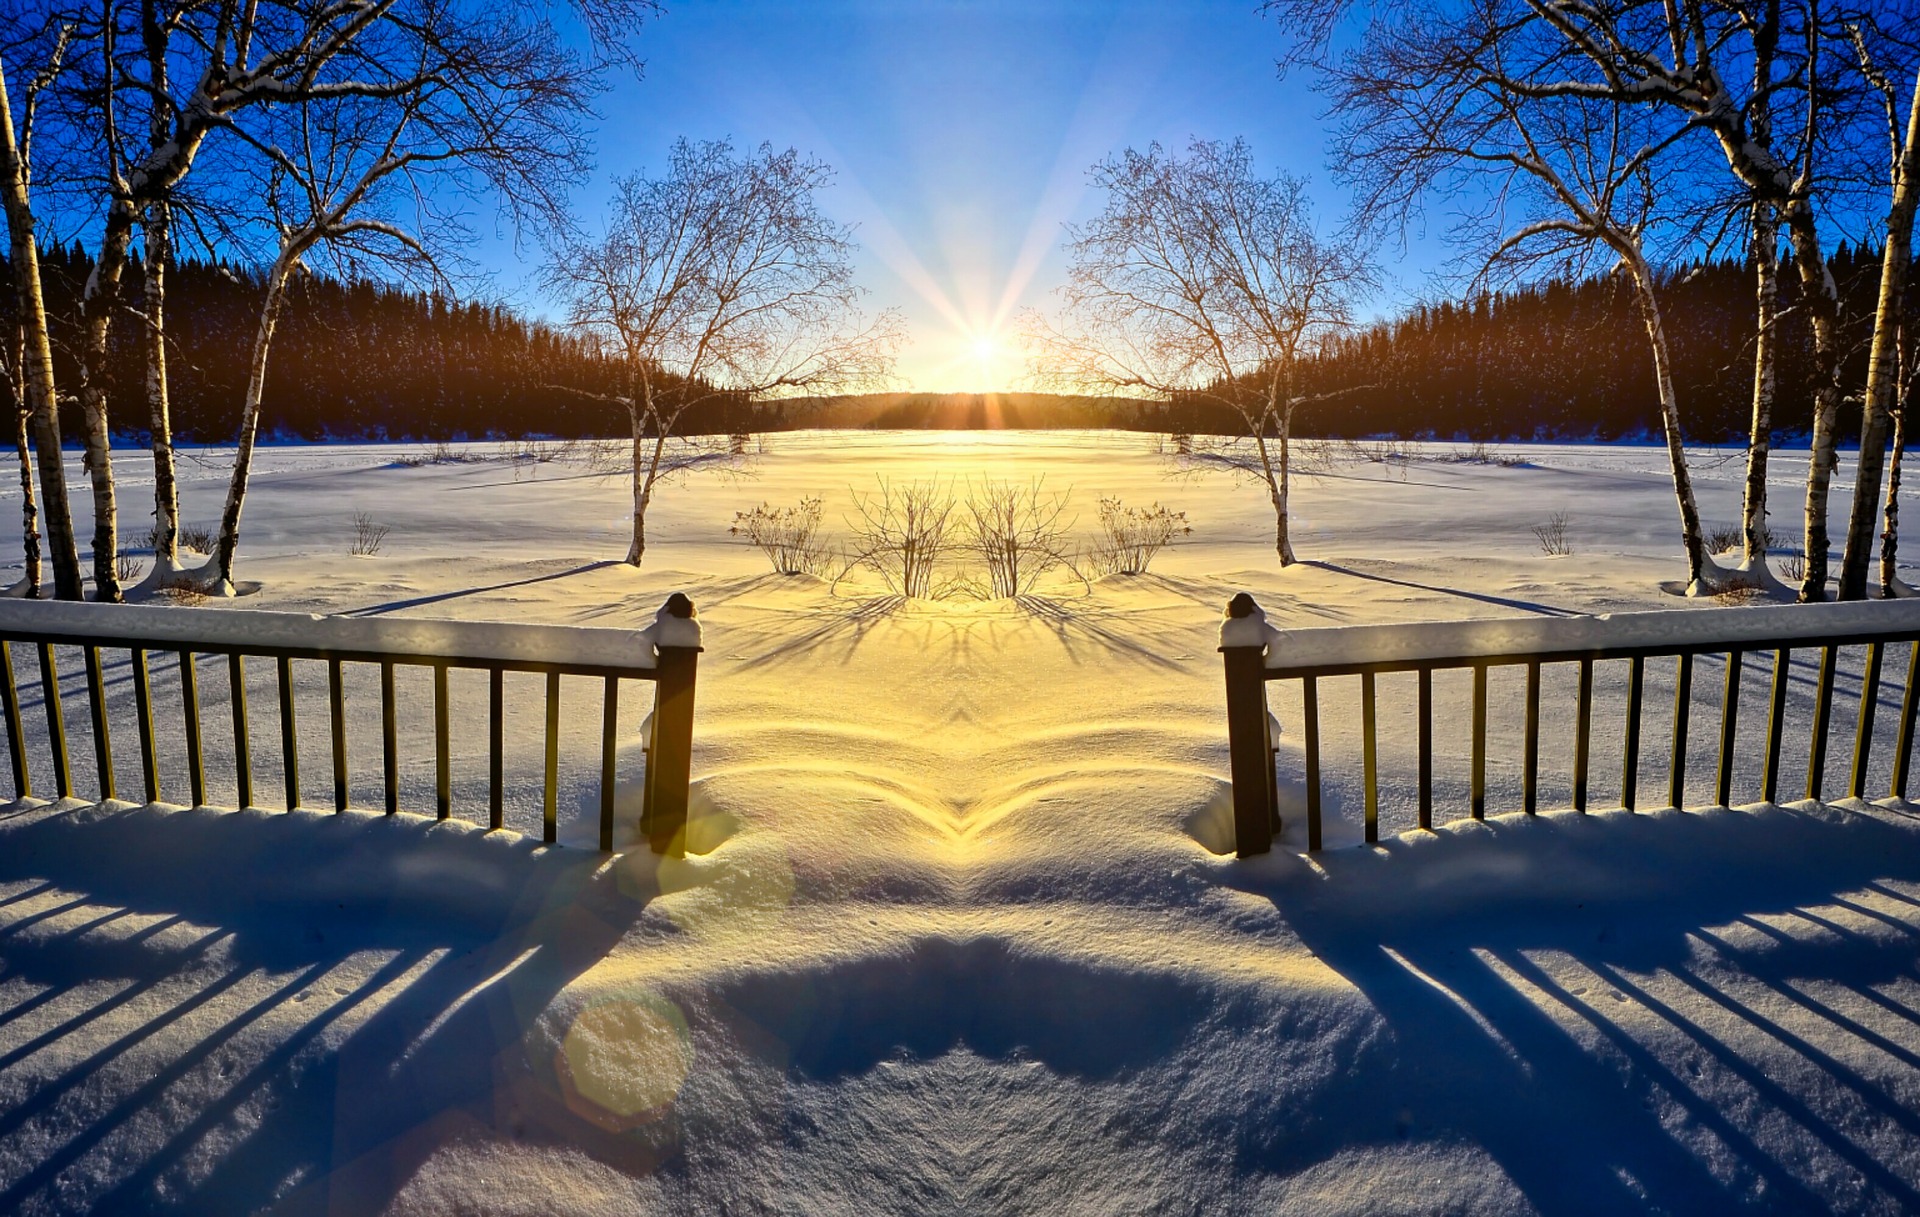 Sunlight over a snowy landscape.